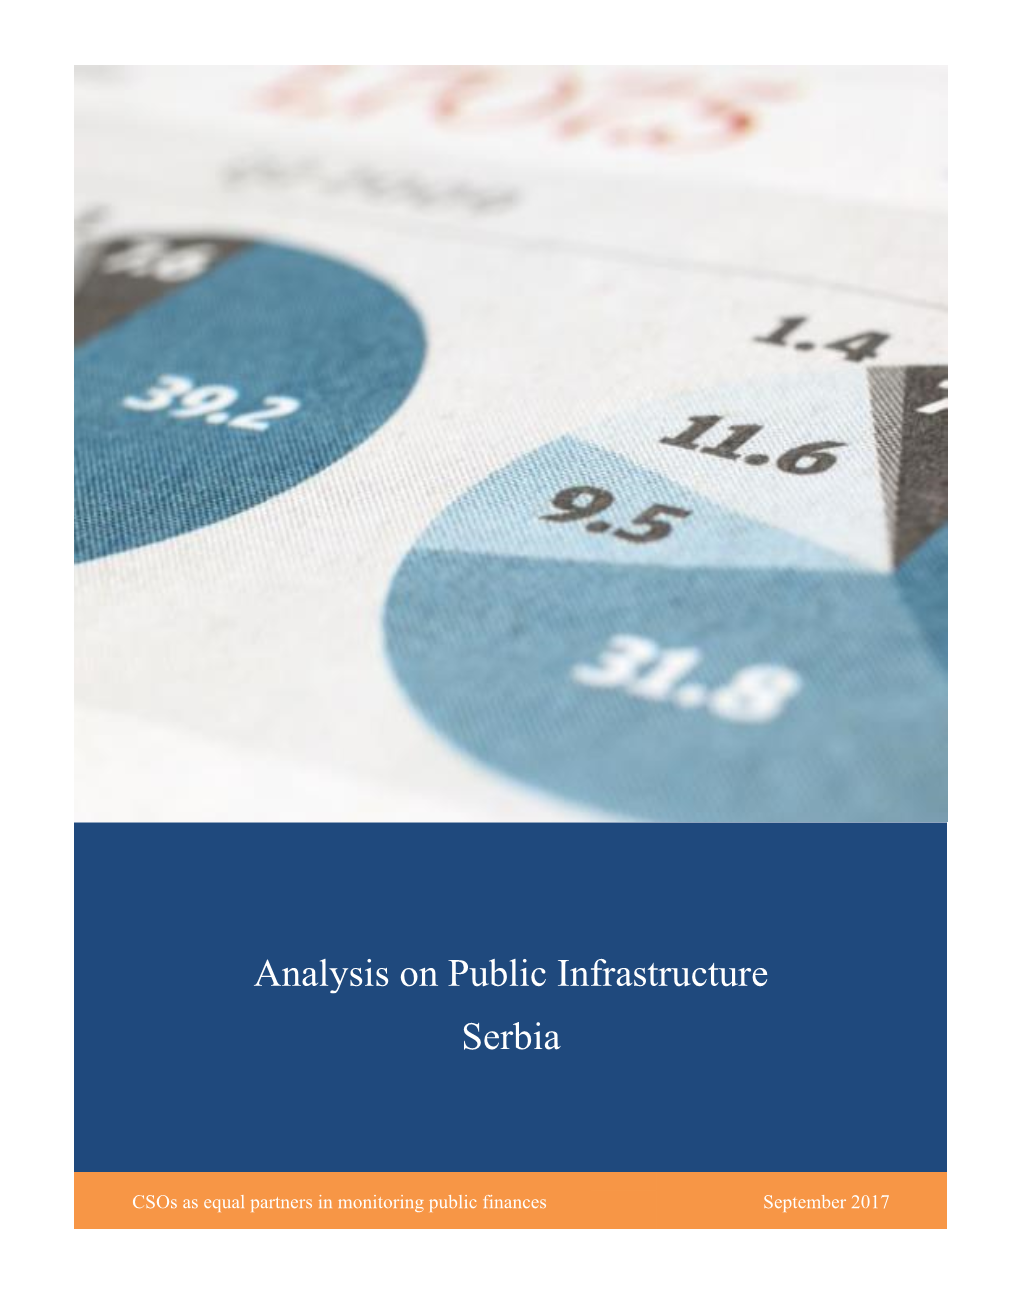 D3.4.2.6. Analysis on Public Infrastructure – Serbia